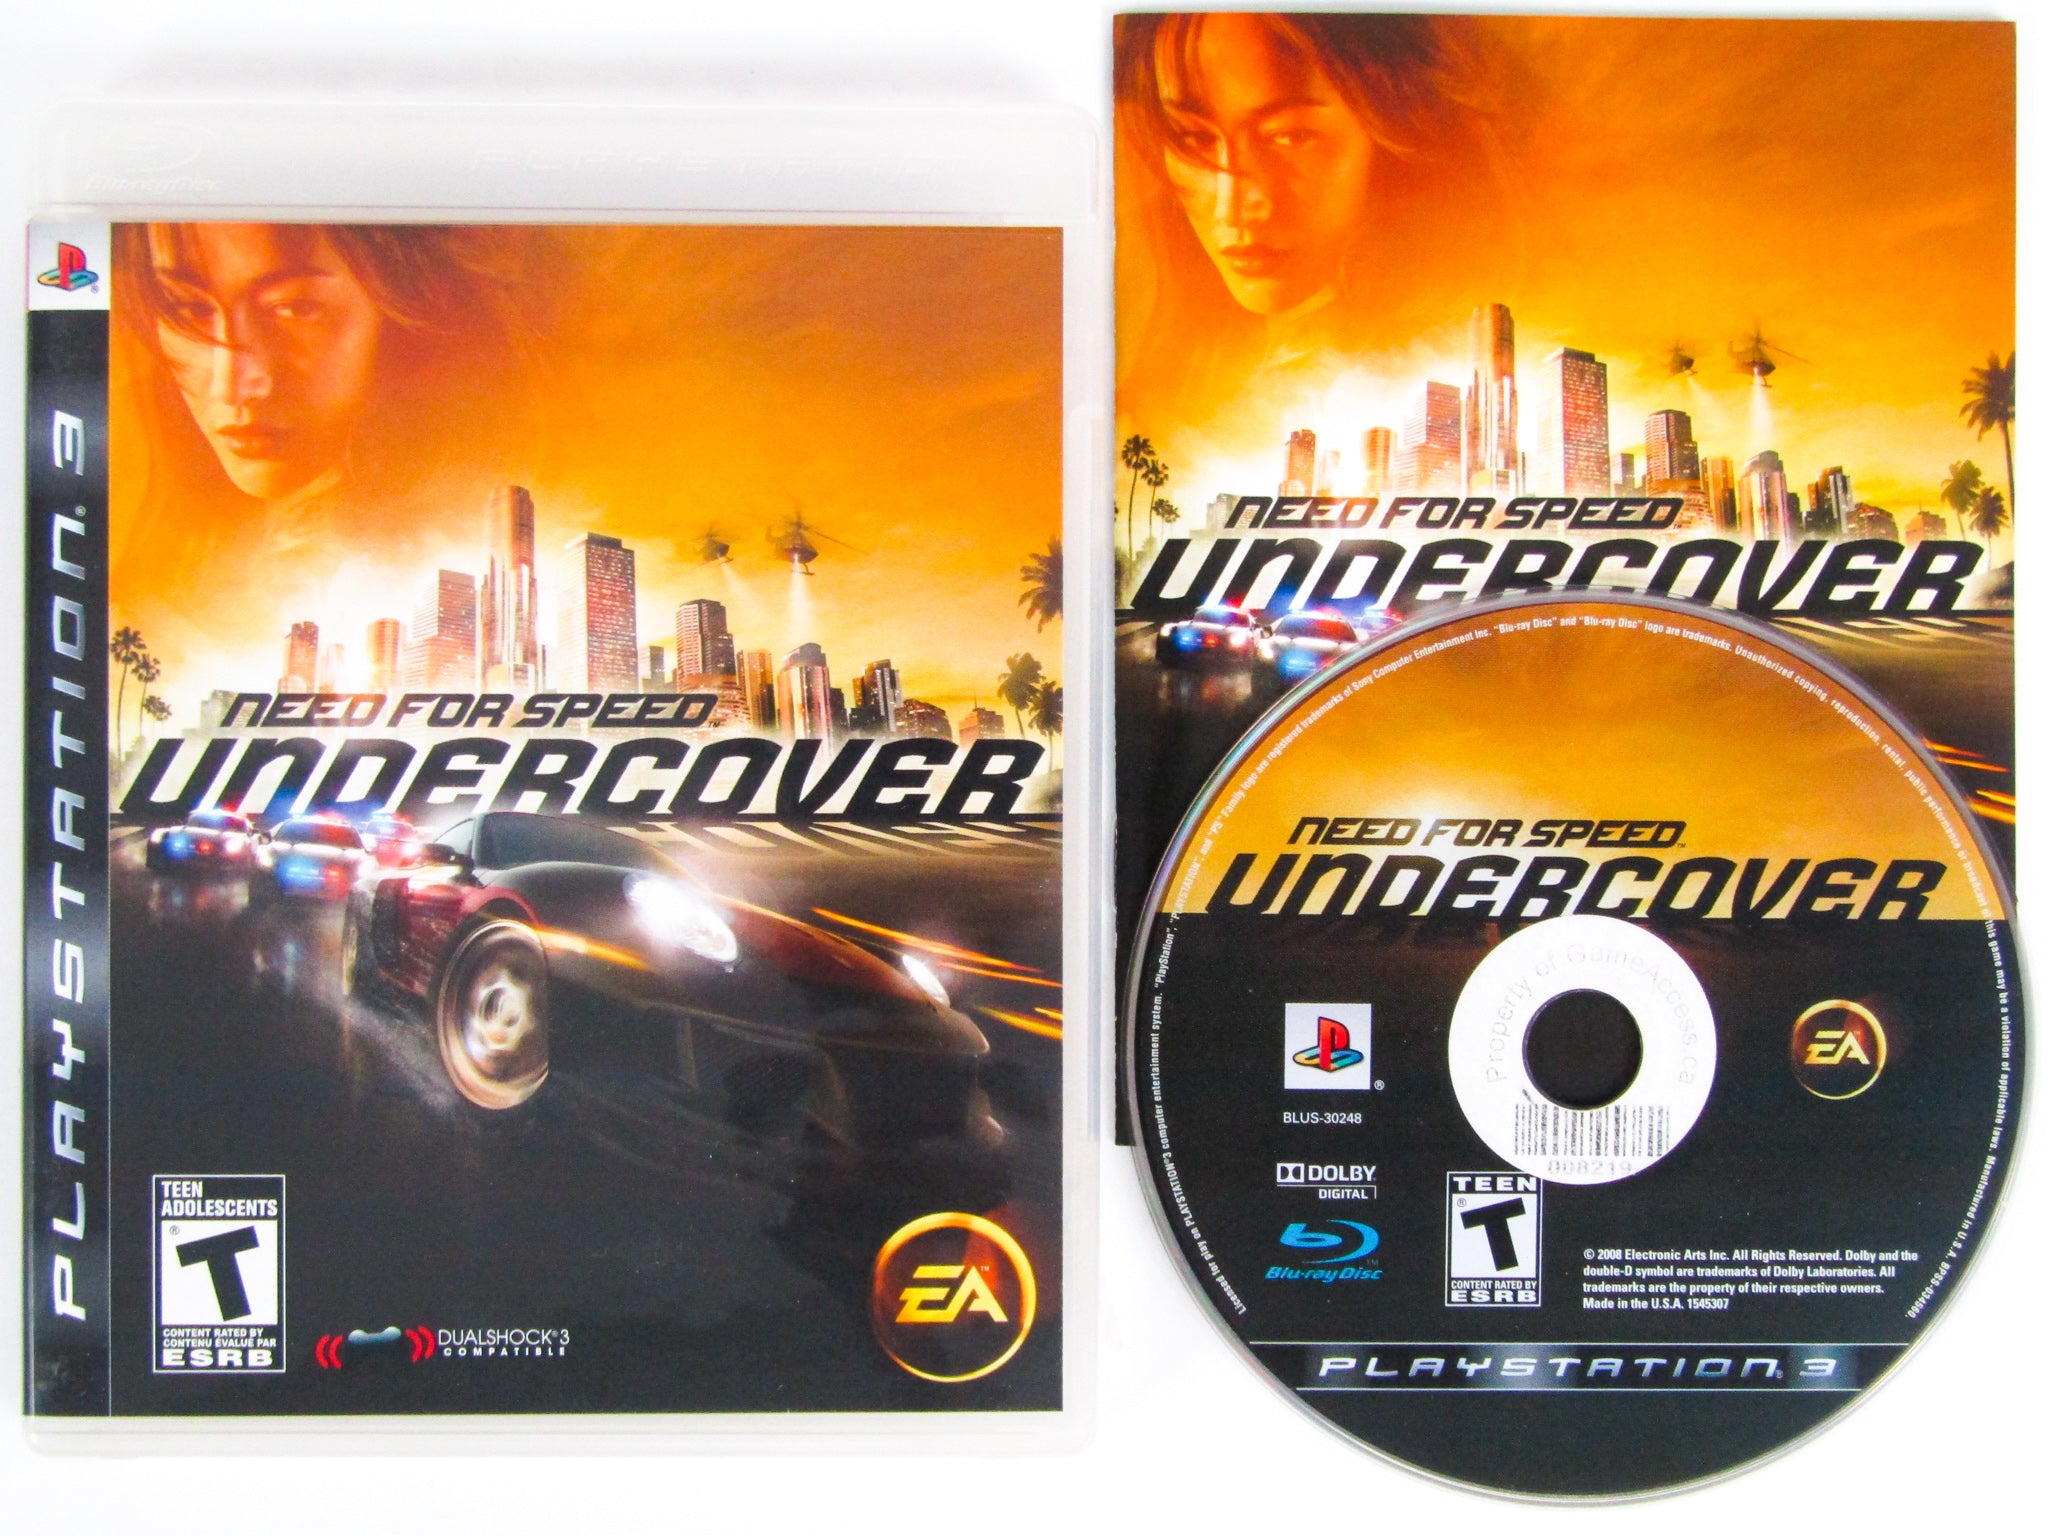 Need For Speed Collection PS3 Game Digital Original PSN - ADRIANAGAMES